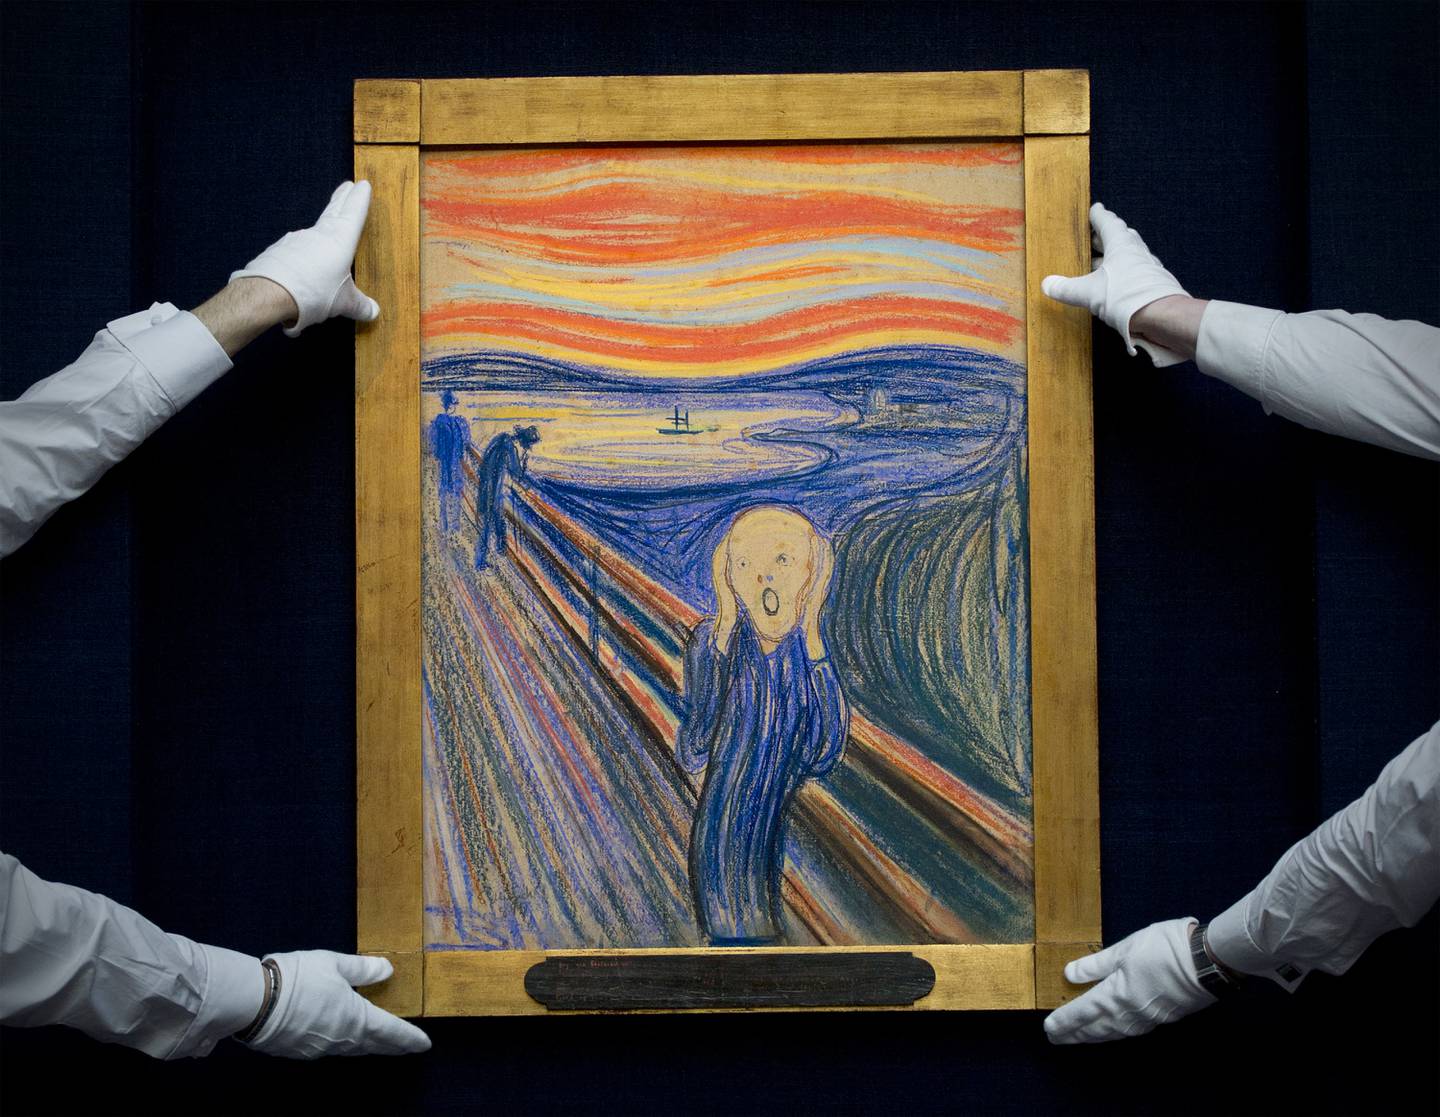 Sotheby's employees pose with Norwegian artist Edvard Munch's 1895 pastel on board version of 'The Scream' at Sotheby's auction house in central London on April 12, 2012. AFP